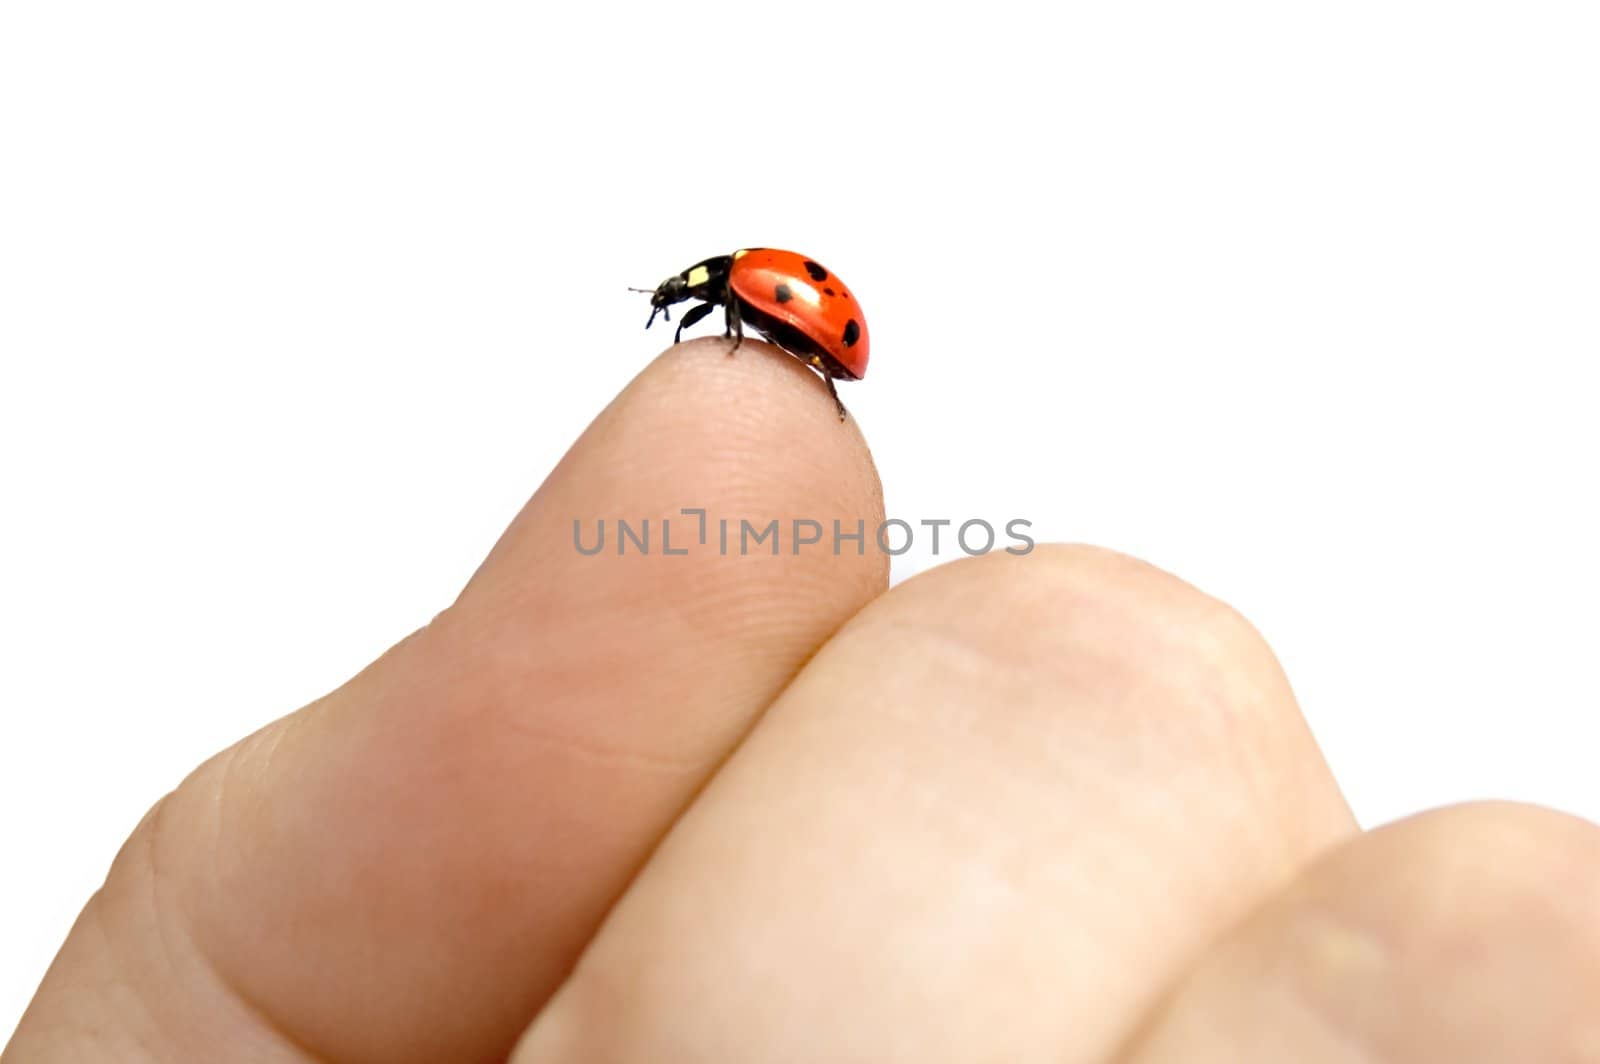 Red in black spotted ladybug on the thumb of a woman's hand on a white background